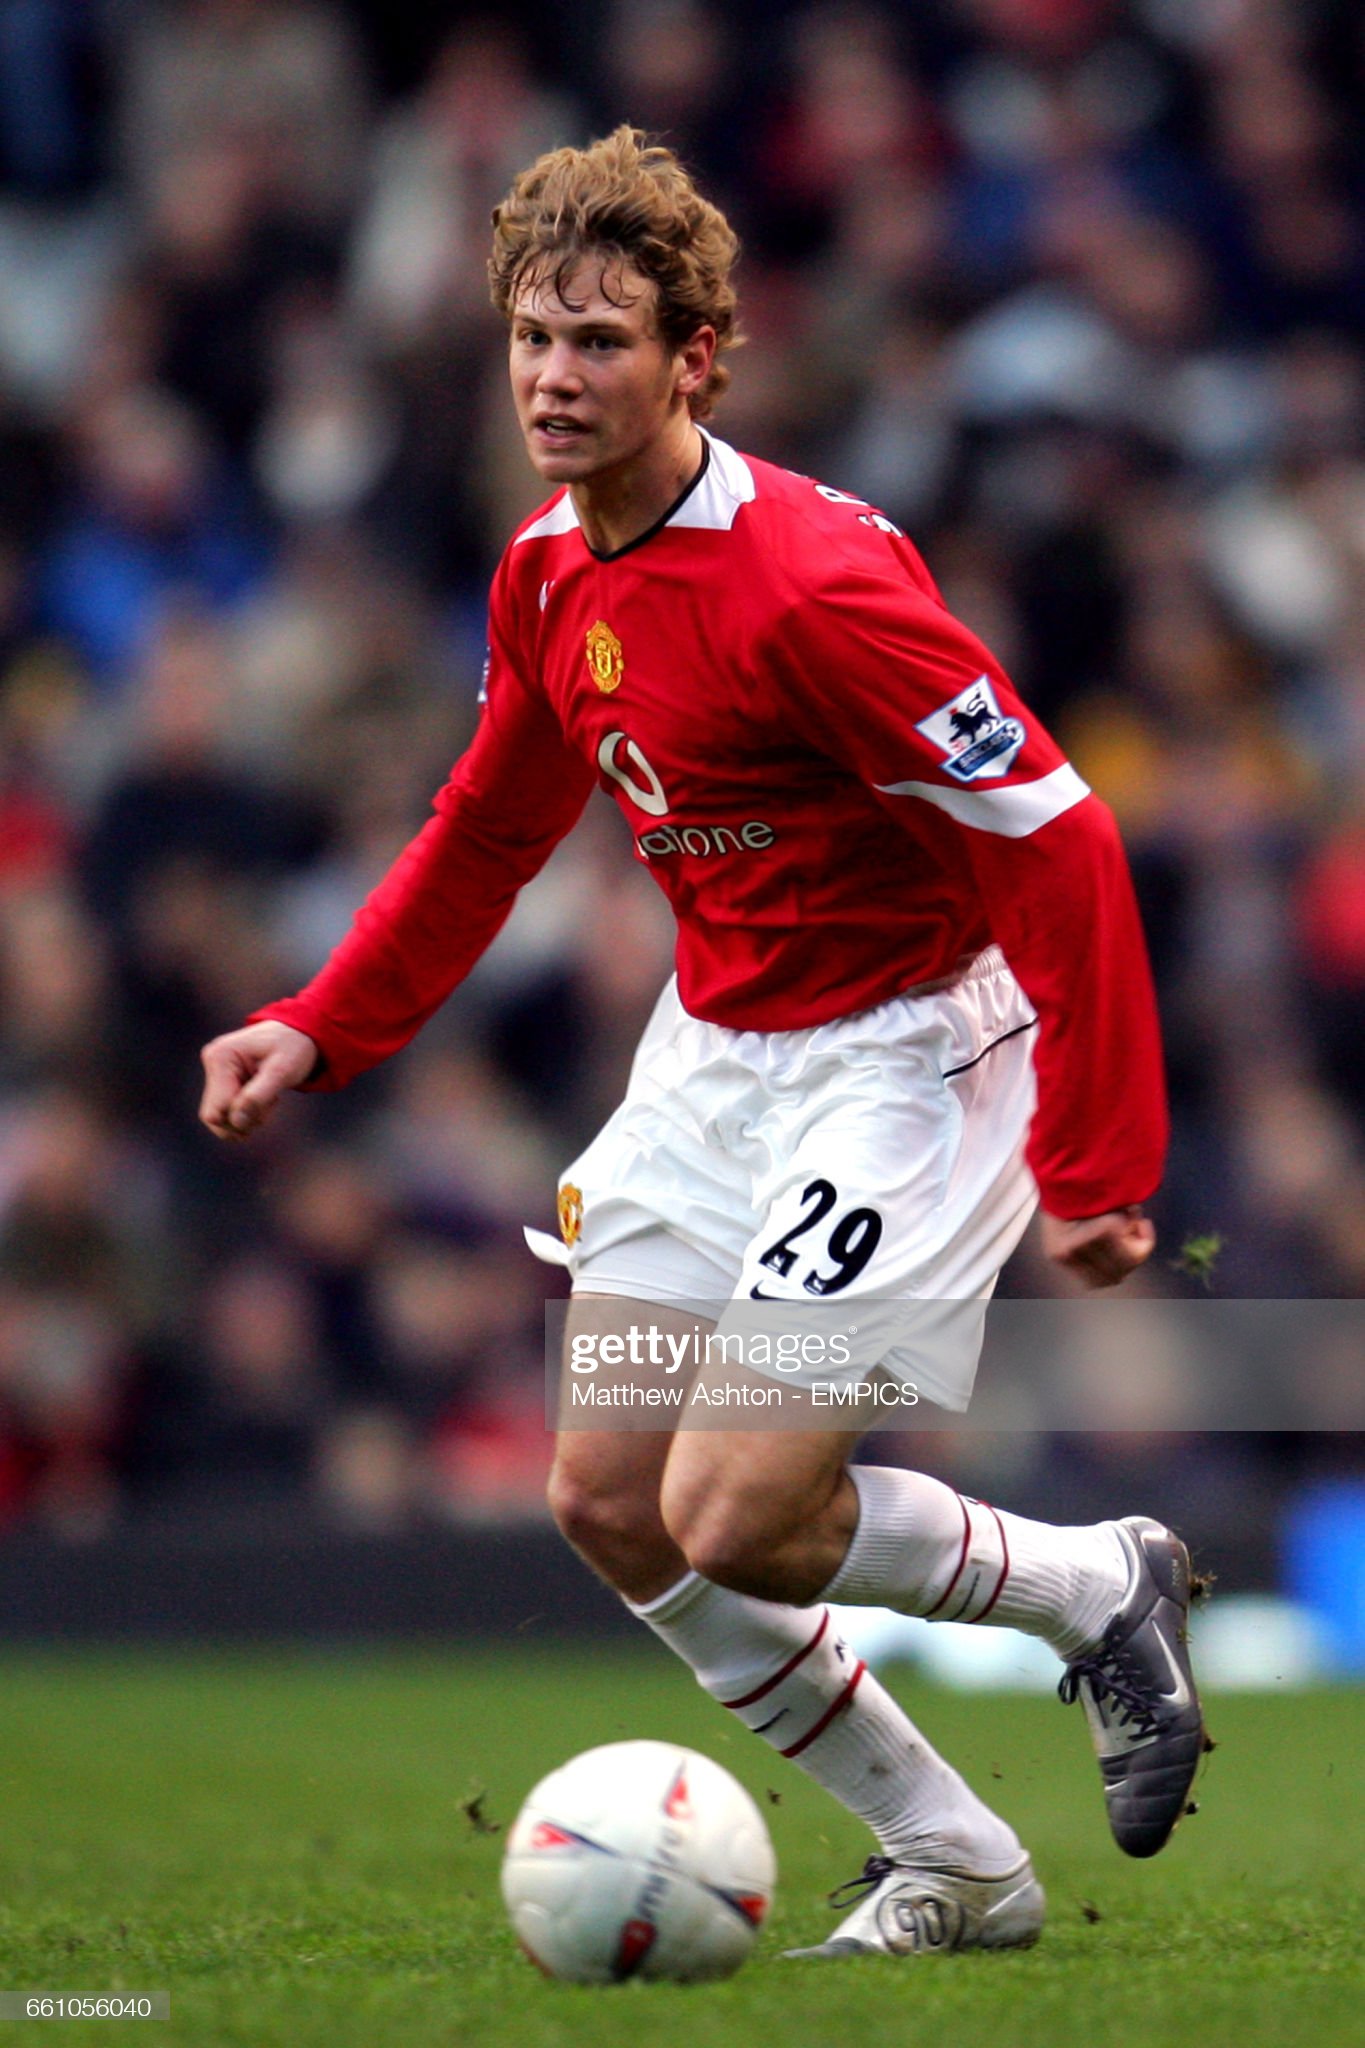 Jonathan Spector American players who have played for Manchester United 